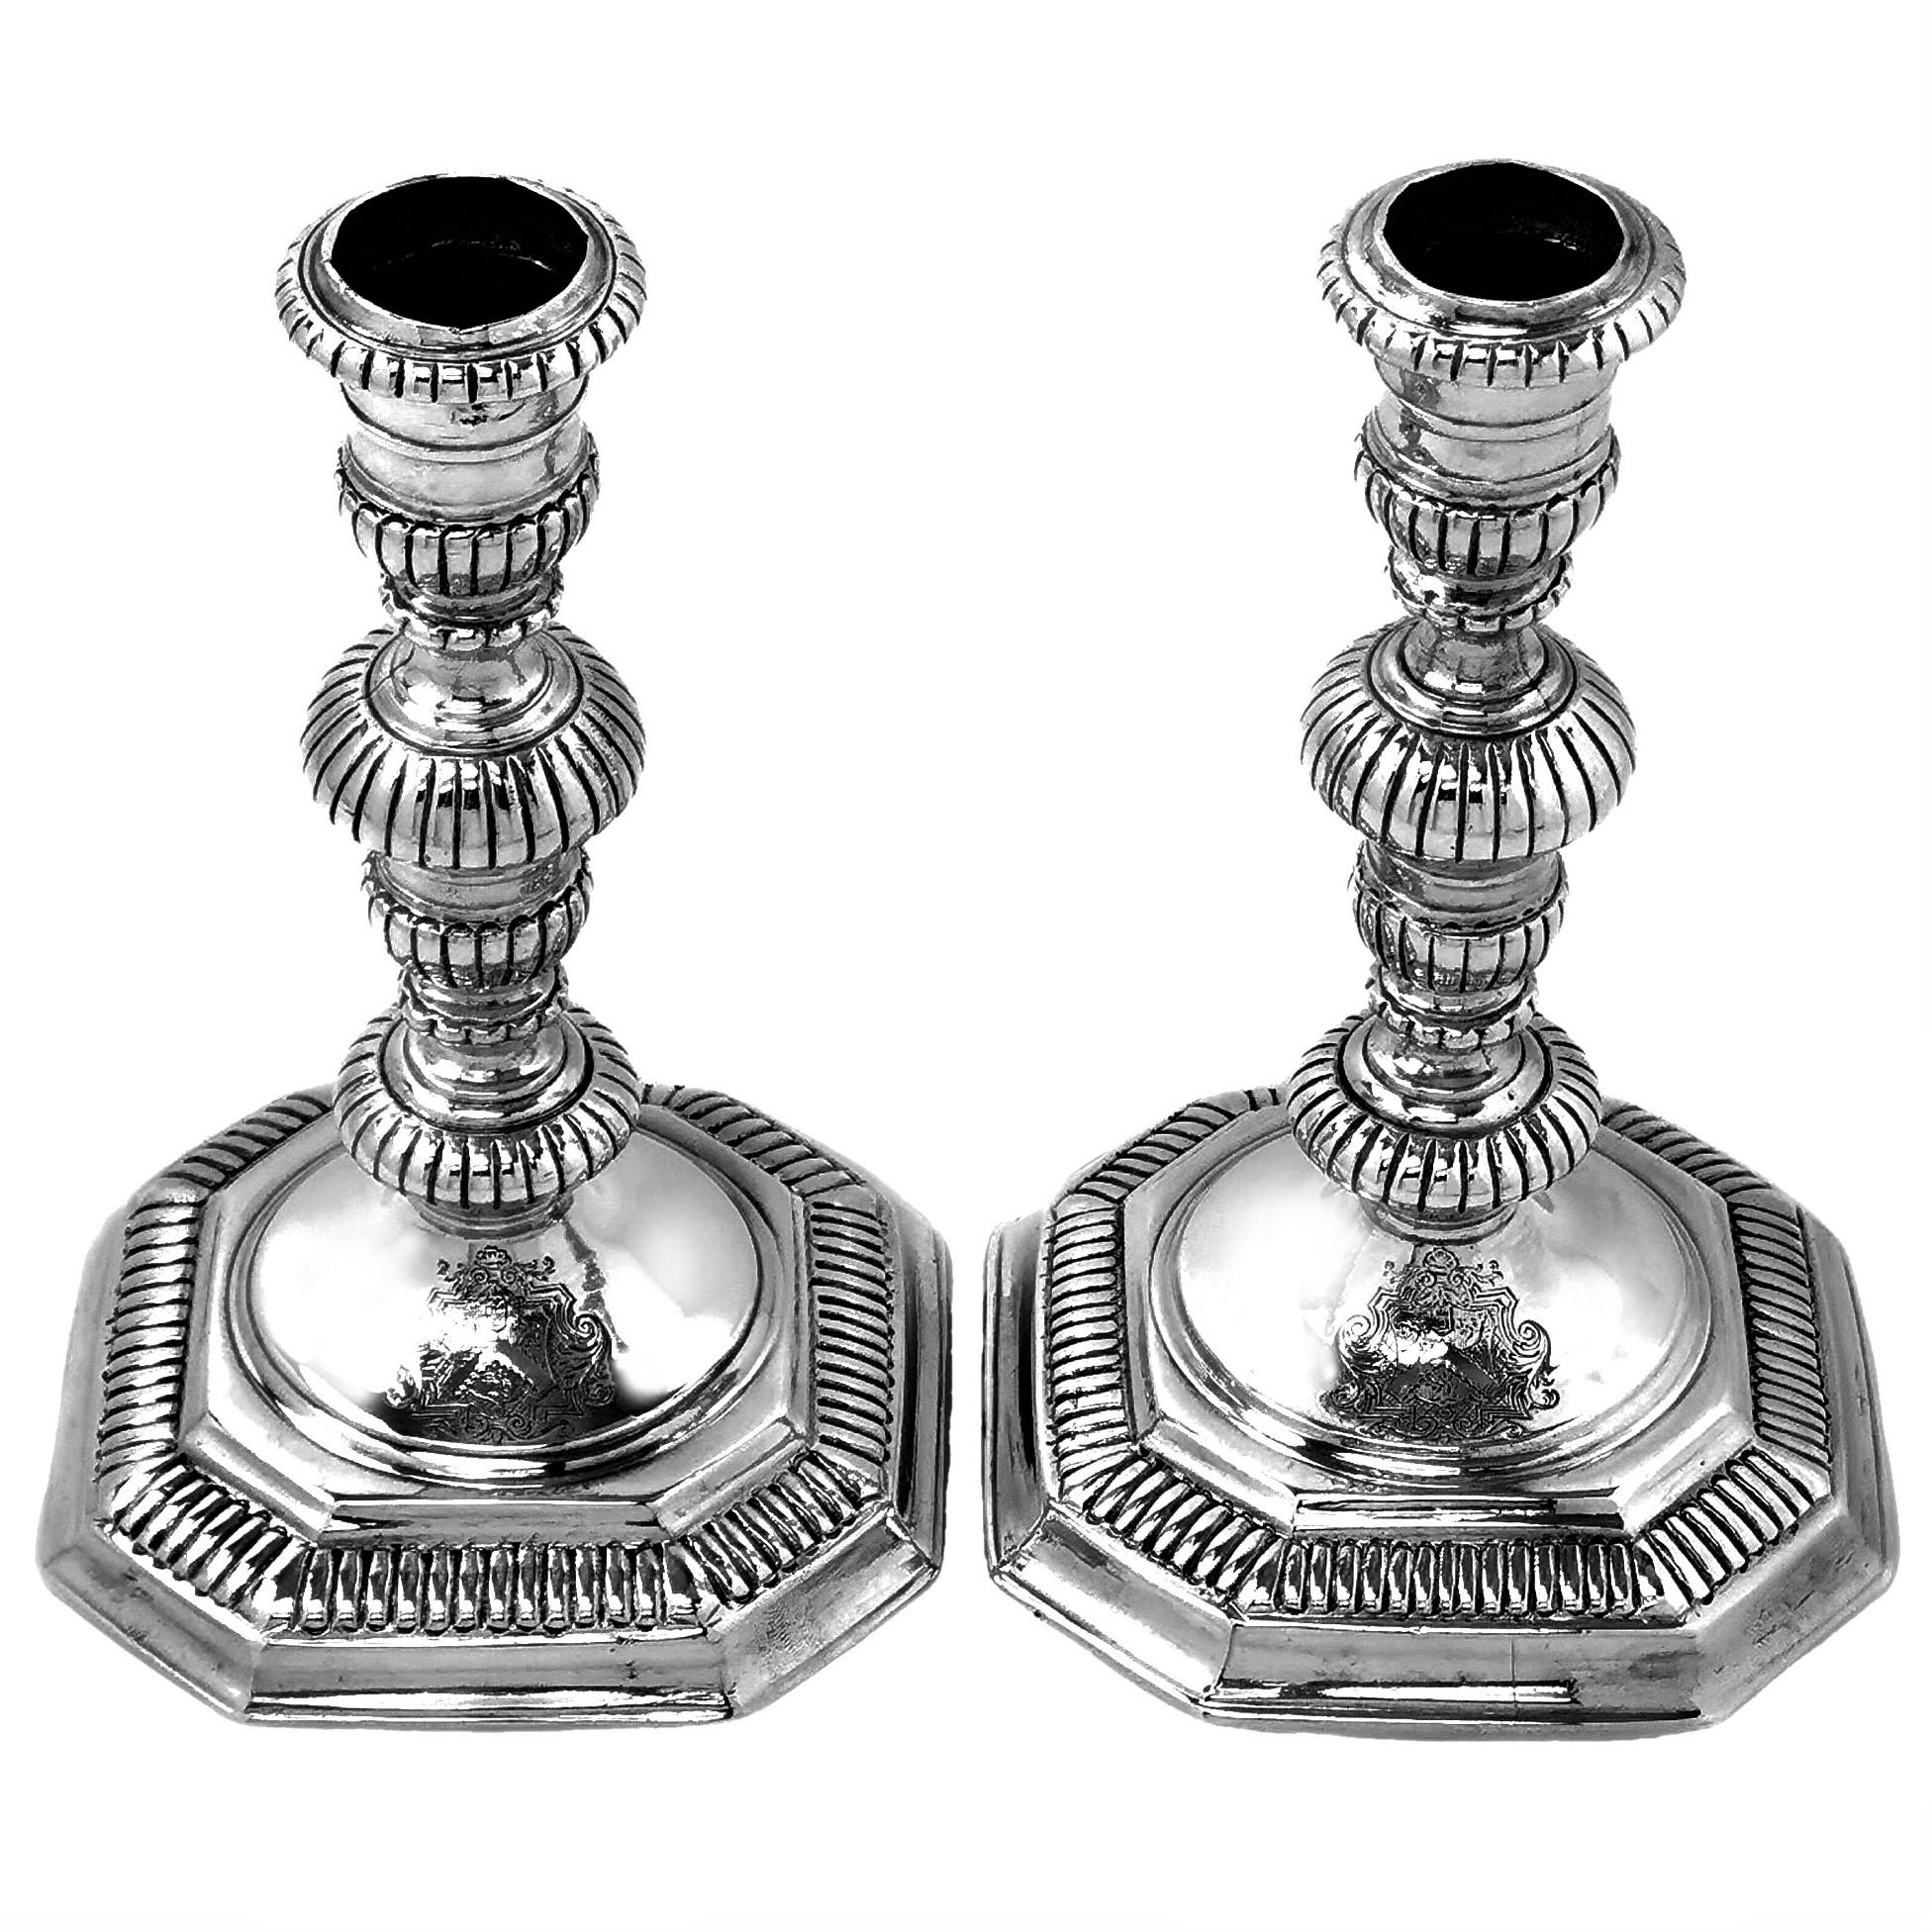 English Pair of Antique Queen Anne Sterling Silver Candlesticks, 1704 Early 18th Century